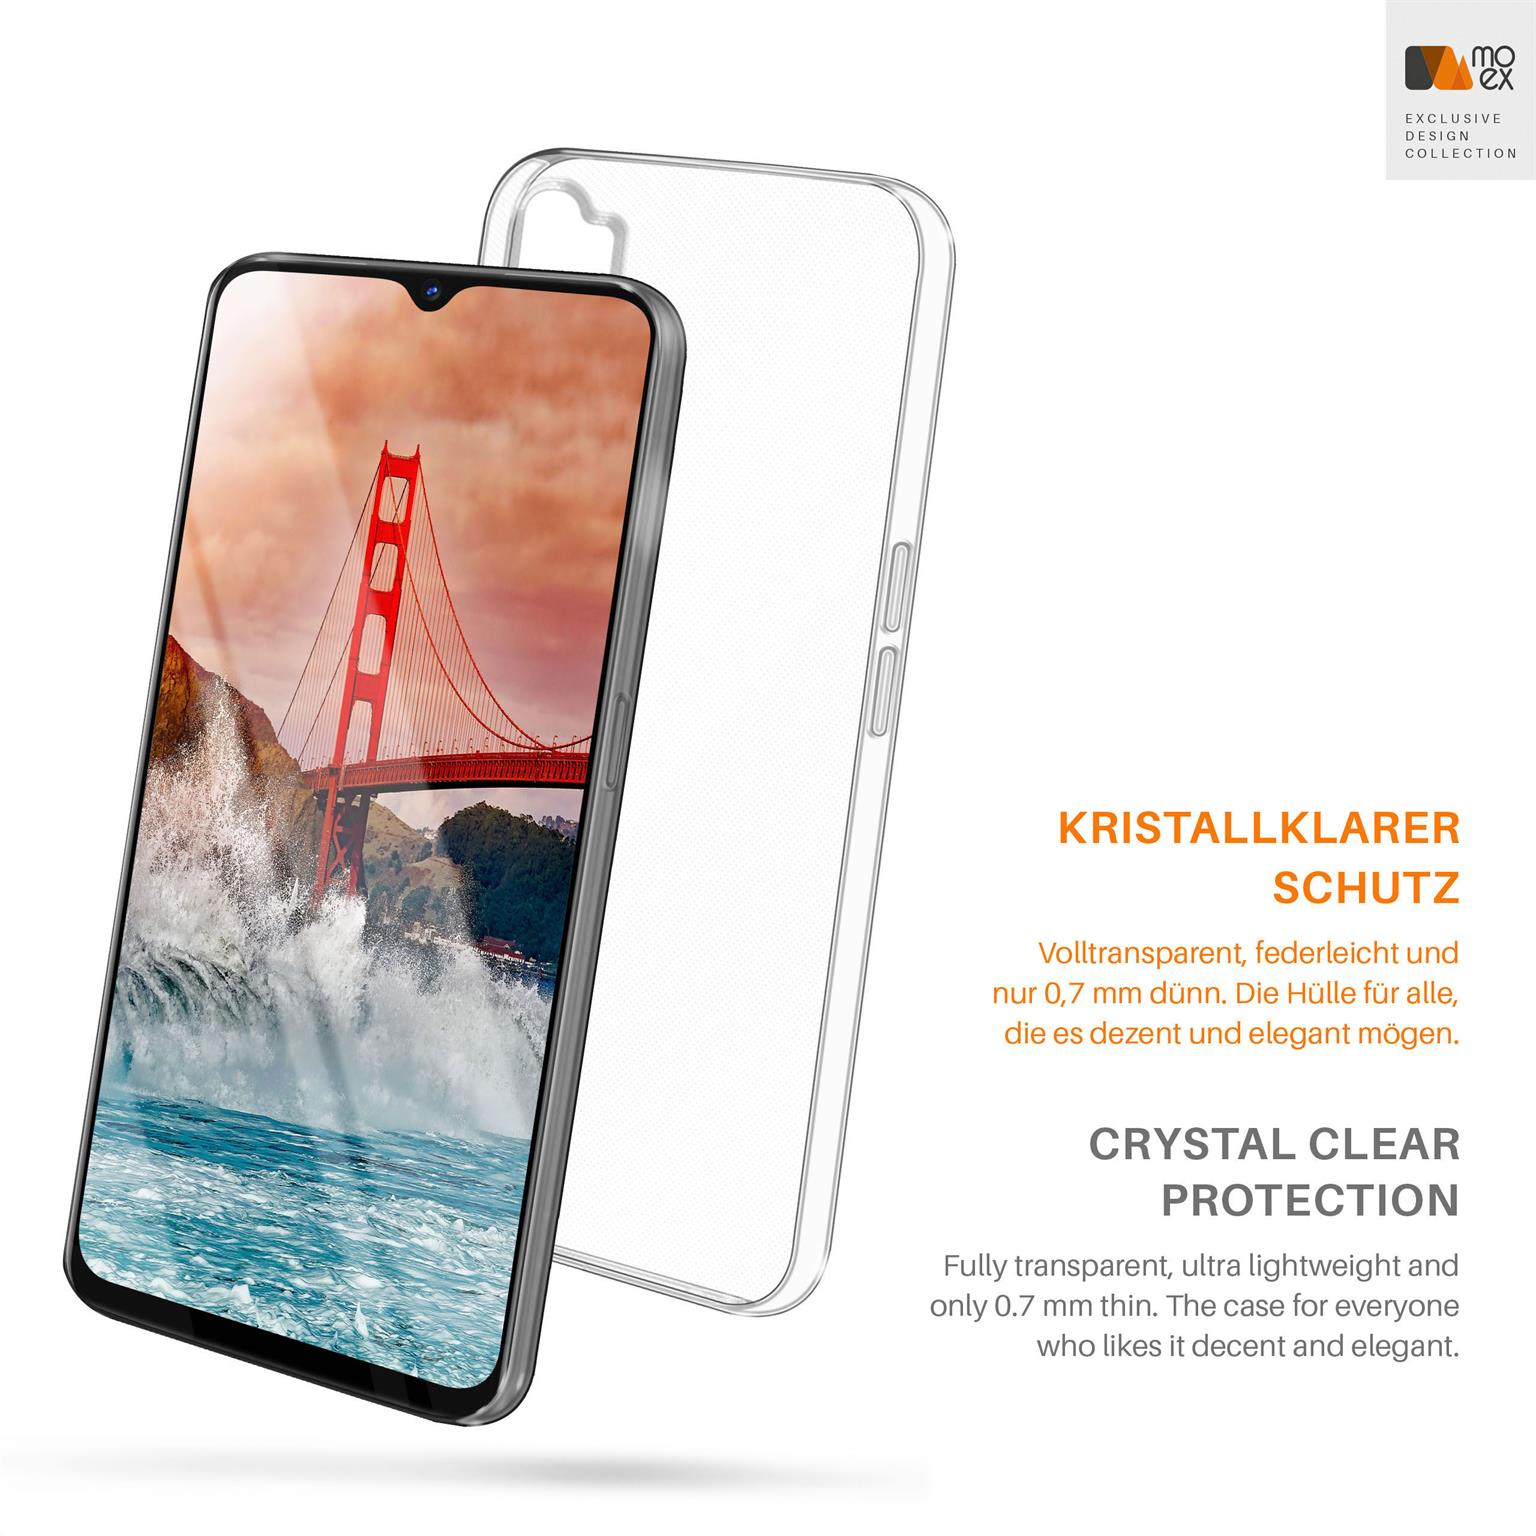 MOEX Aero Case, Backcover, Oppo, Crystal-Clear X2 Lite, Find